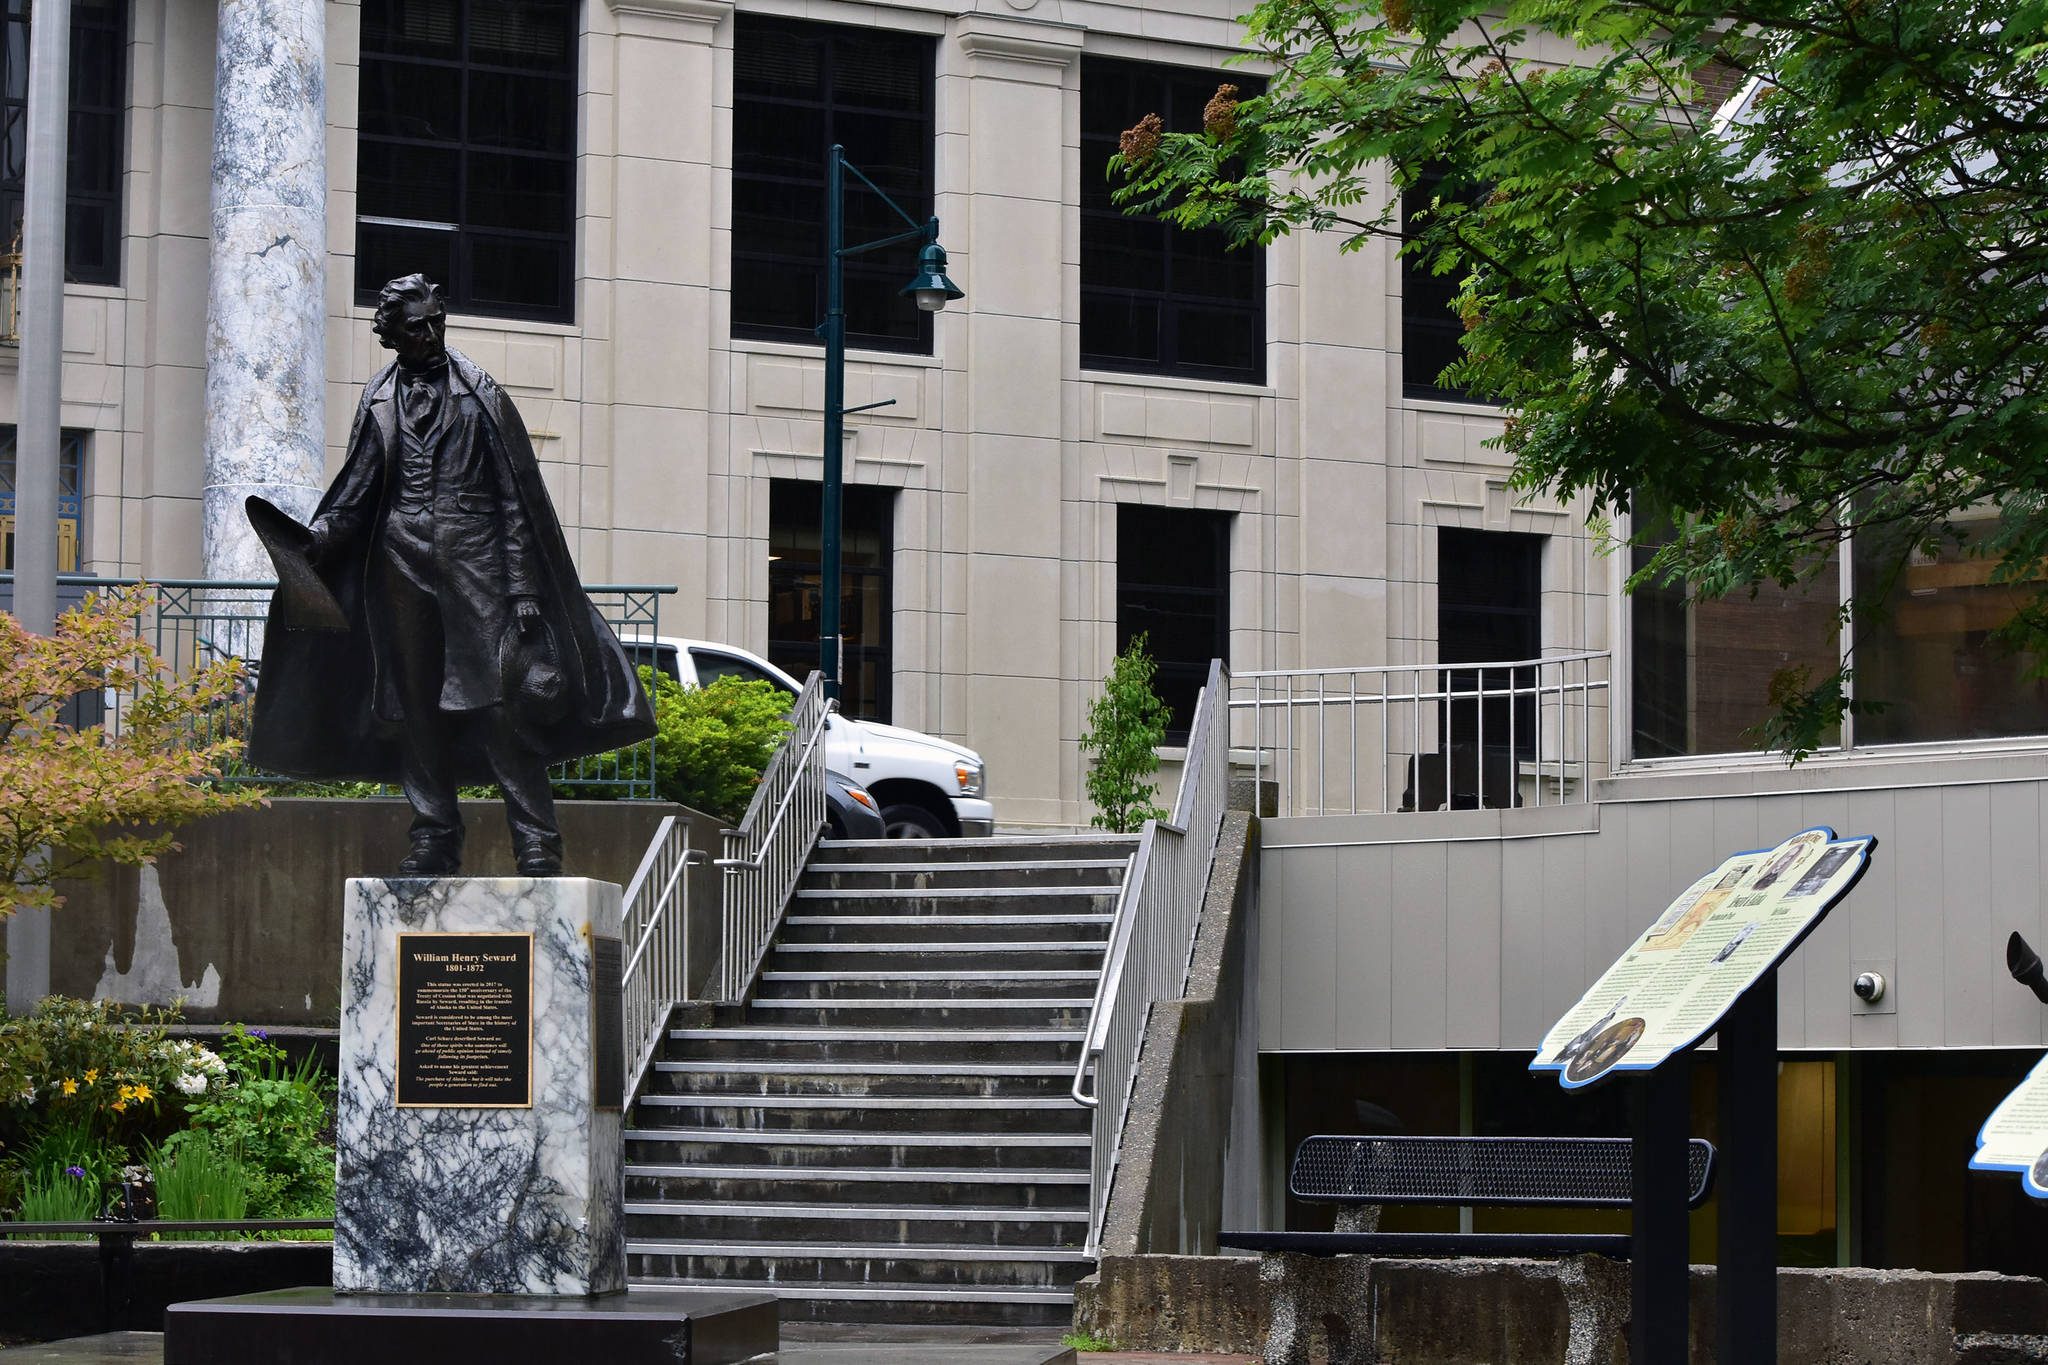 A statue of William Henry Seward, former U.S. Senator and governor of New York, Vice President and Secretary of State who negotiated the purchase of the Alaska territory from the Russian Empire in 1867 on Tuesday, June 16, 2020. (Peter Segall | Juneau Empire)